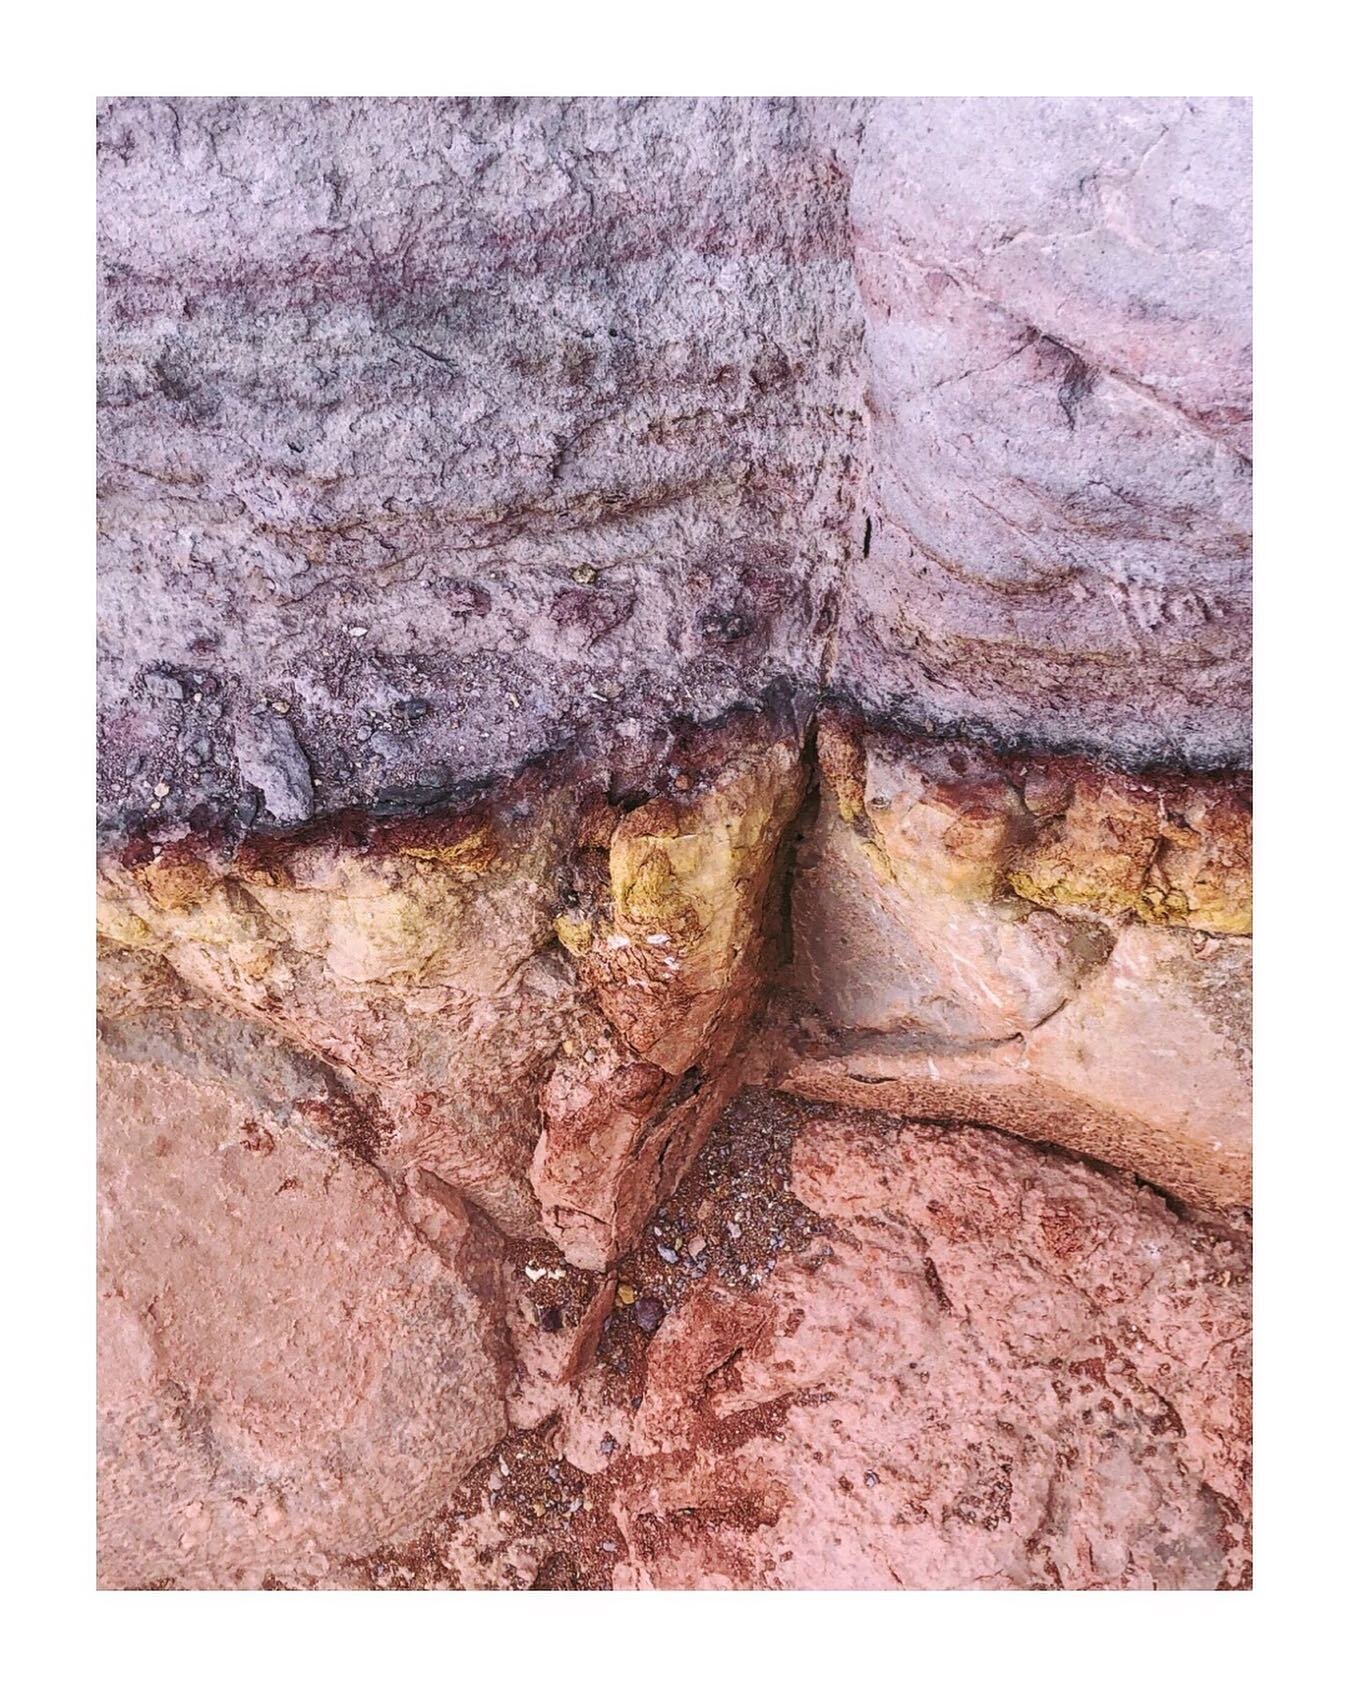 To paint with natural pigments is to work with the most ancient art medium on our planet, using minerals and microorganisms. With such ochres, our earliest human ancestors expressed their visions and dreams, and told their stories of interconnectivit